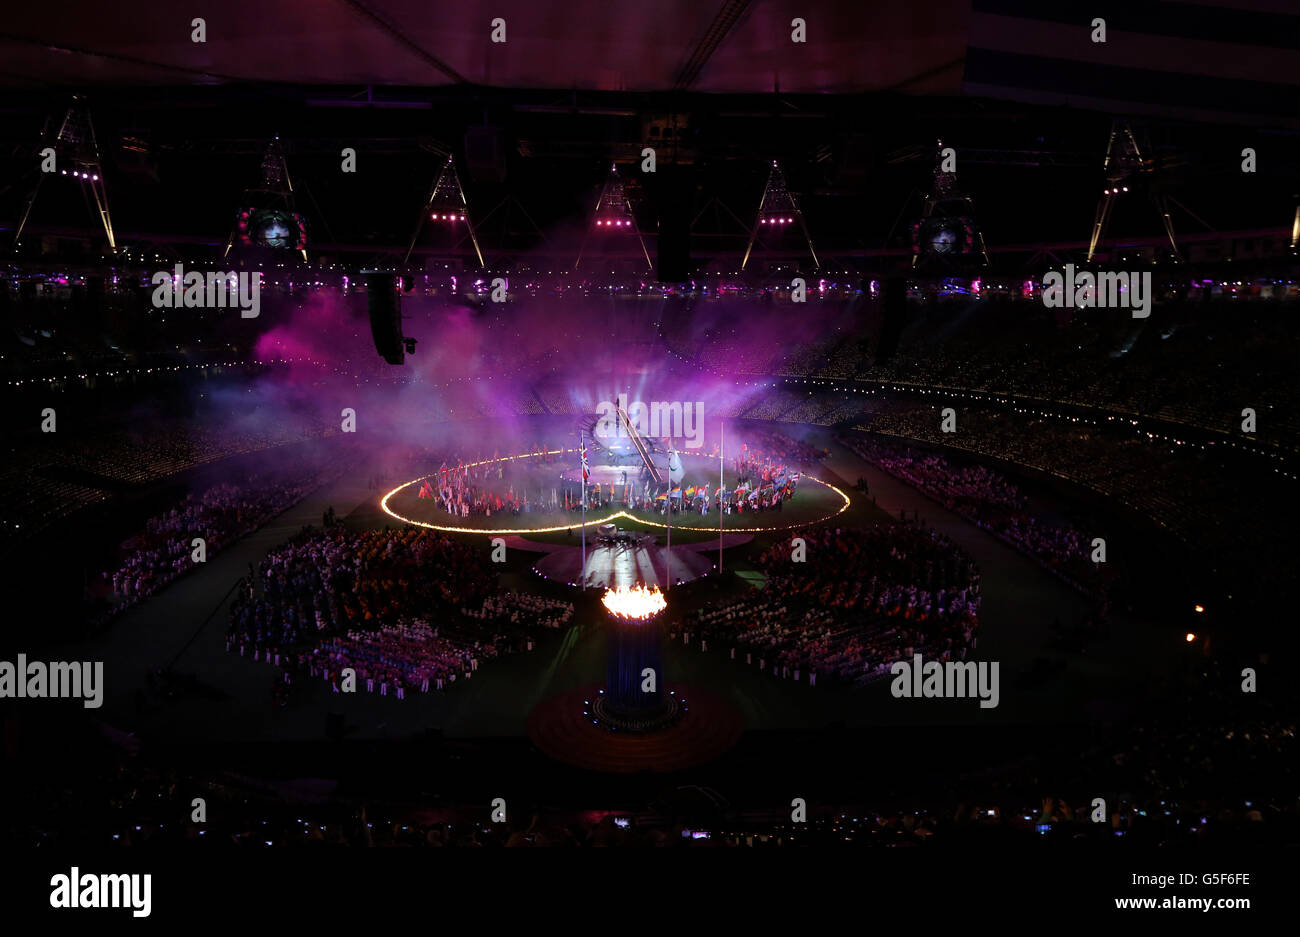 London Paralympic Games - Day 11. A general view during the Paralympic Games closing Ceremony at the Olympic Stadium, London. Stock Photo